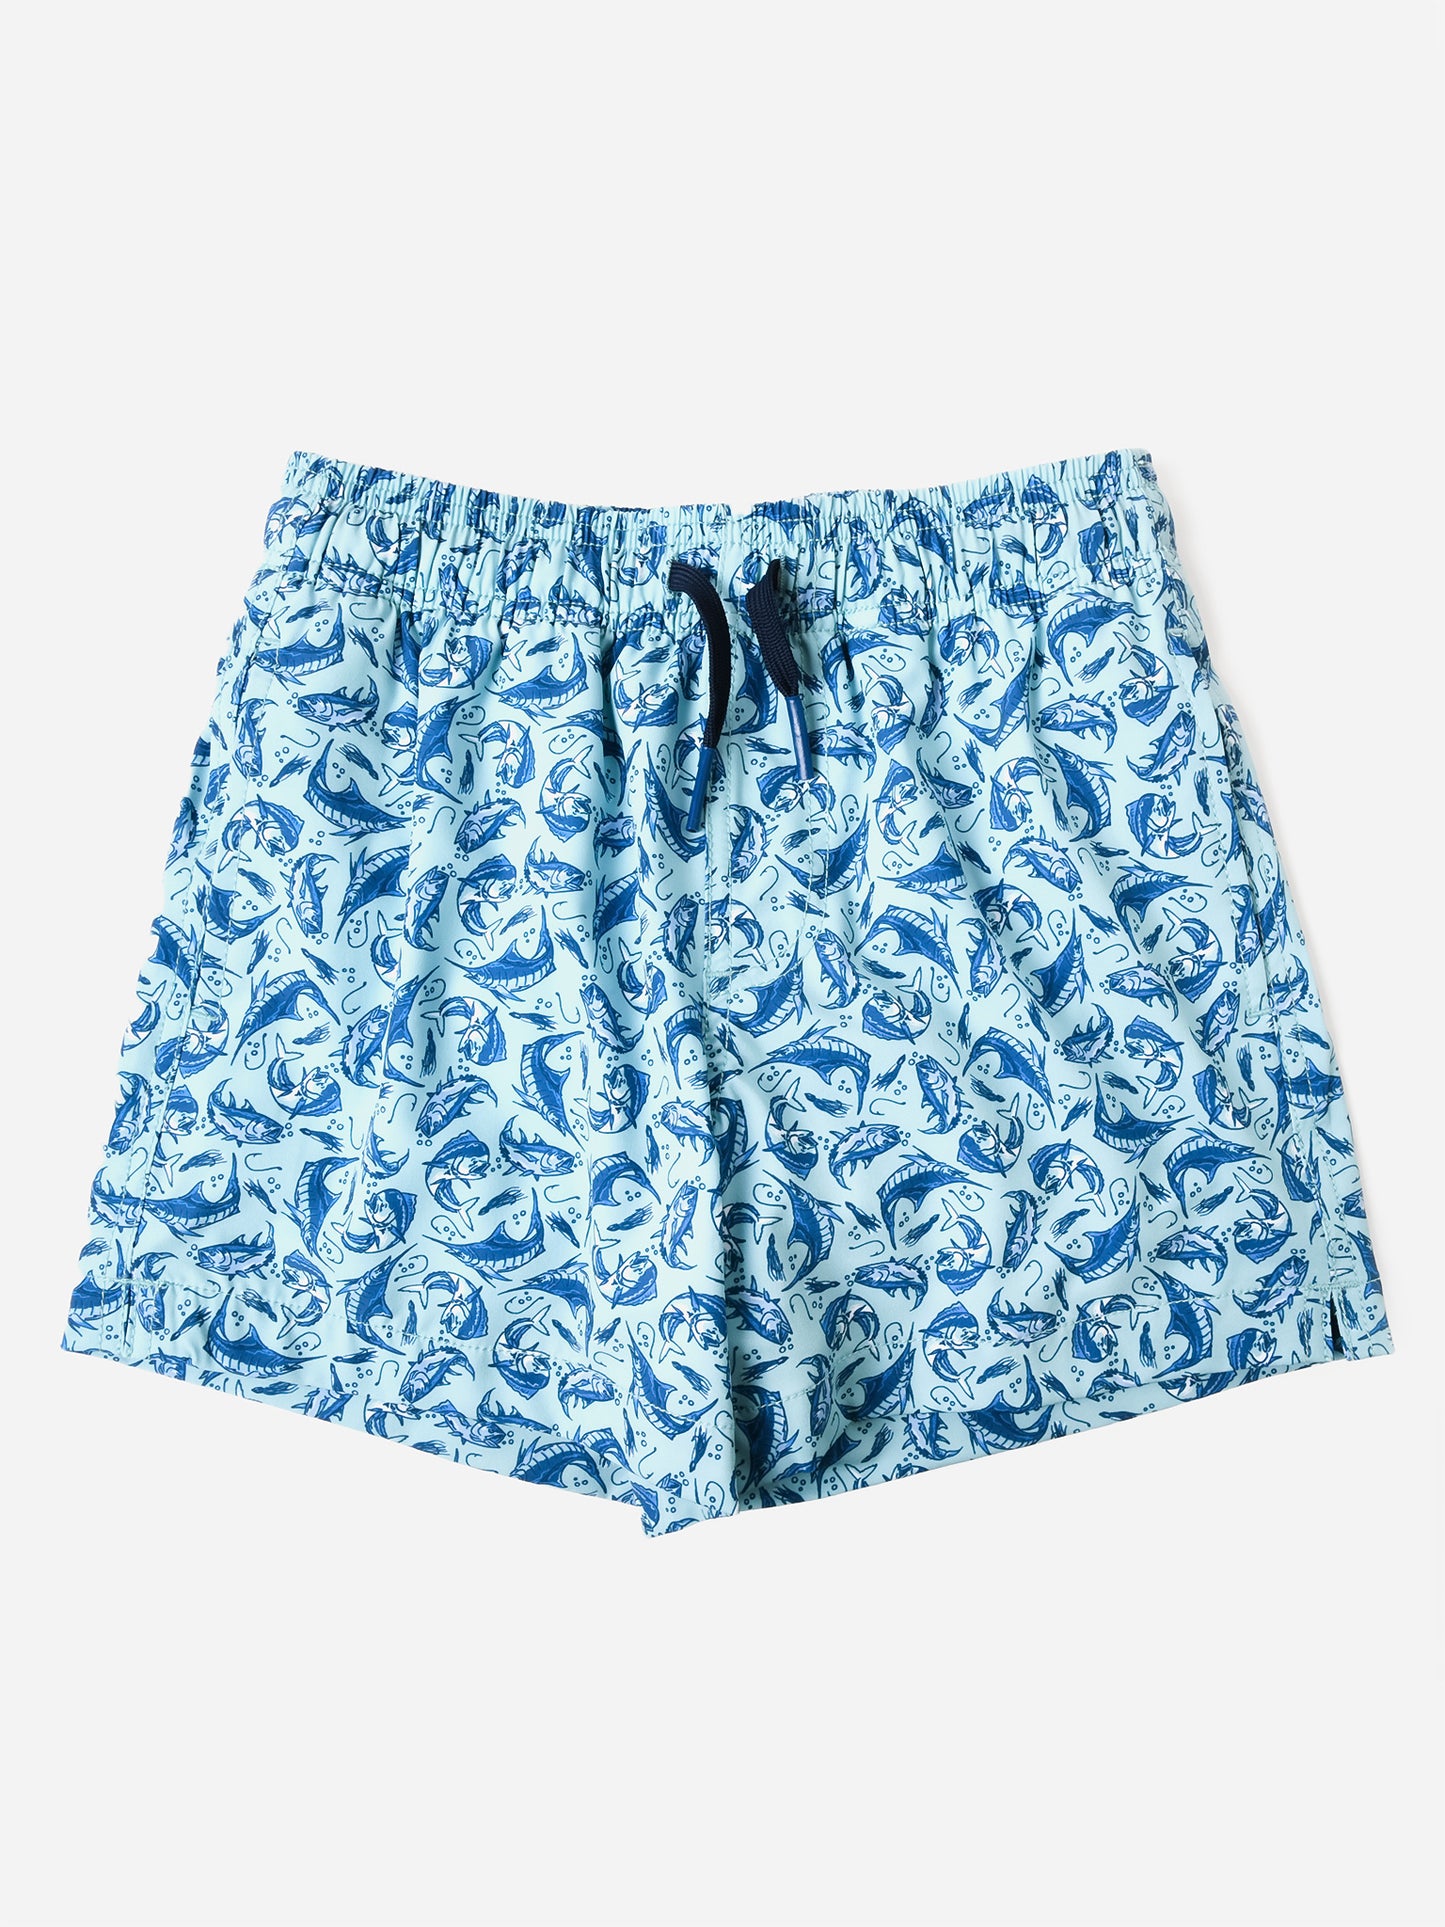 Southern Tide Boys' Catch You Later Printed Swim Trunk